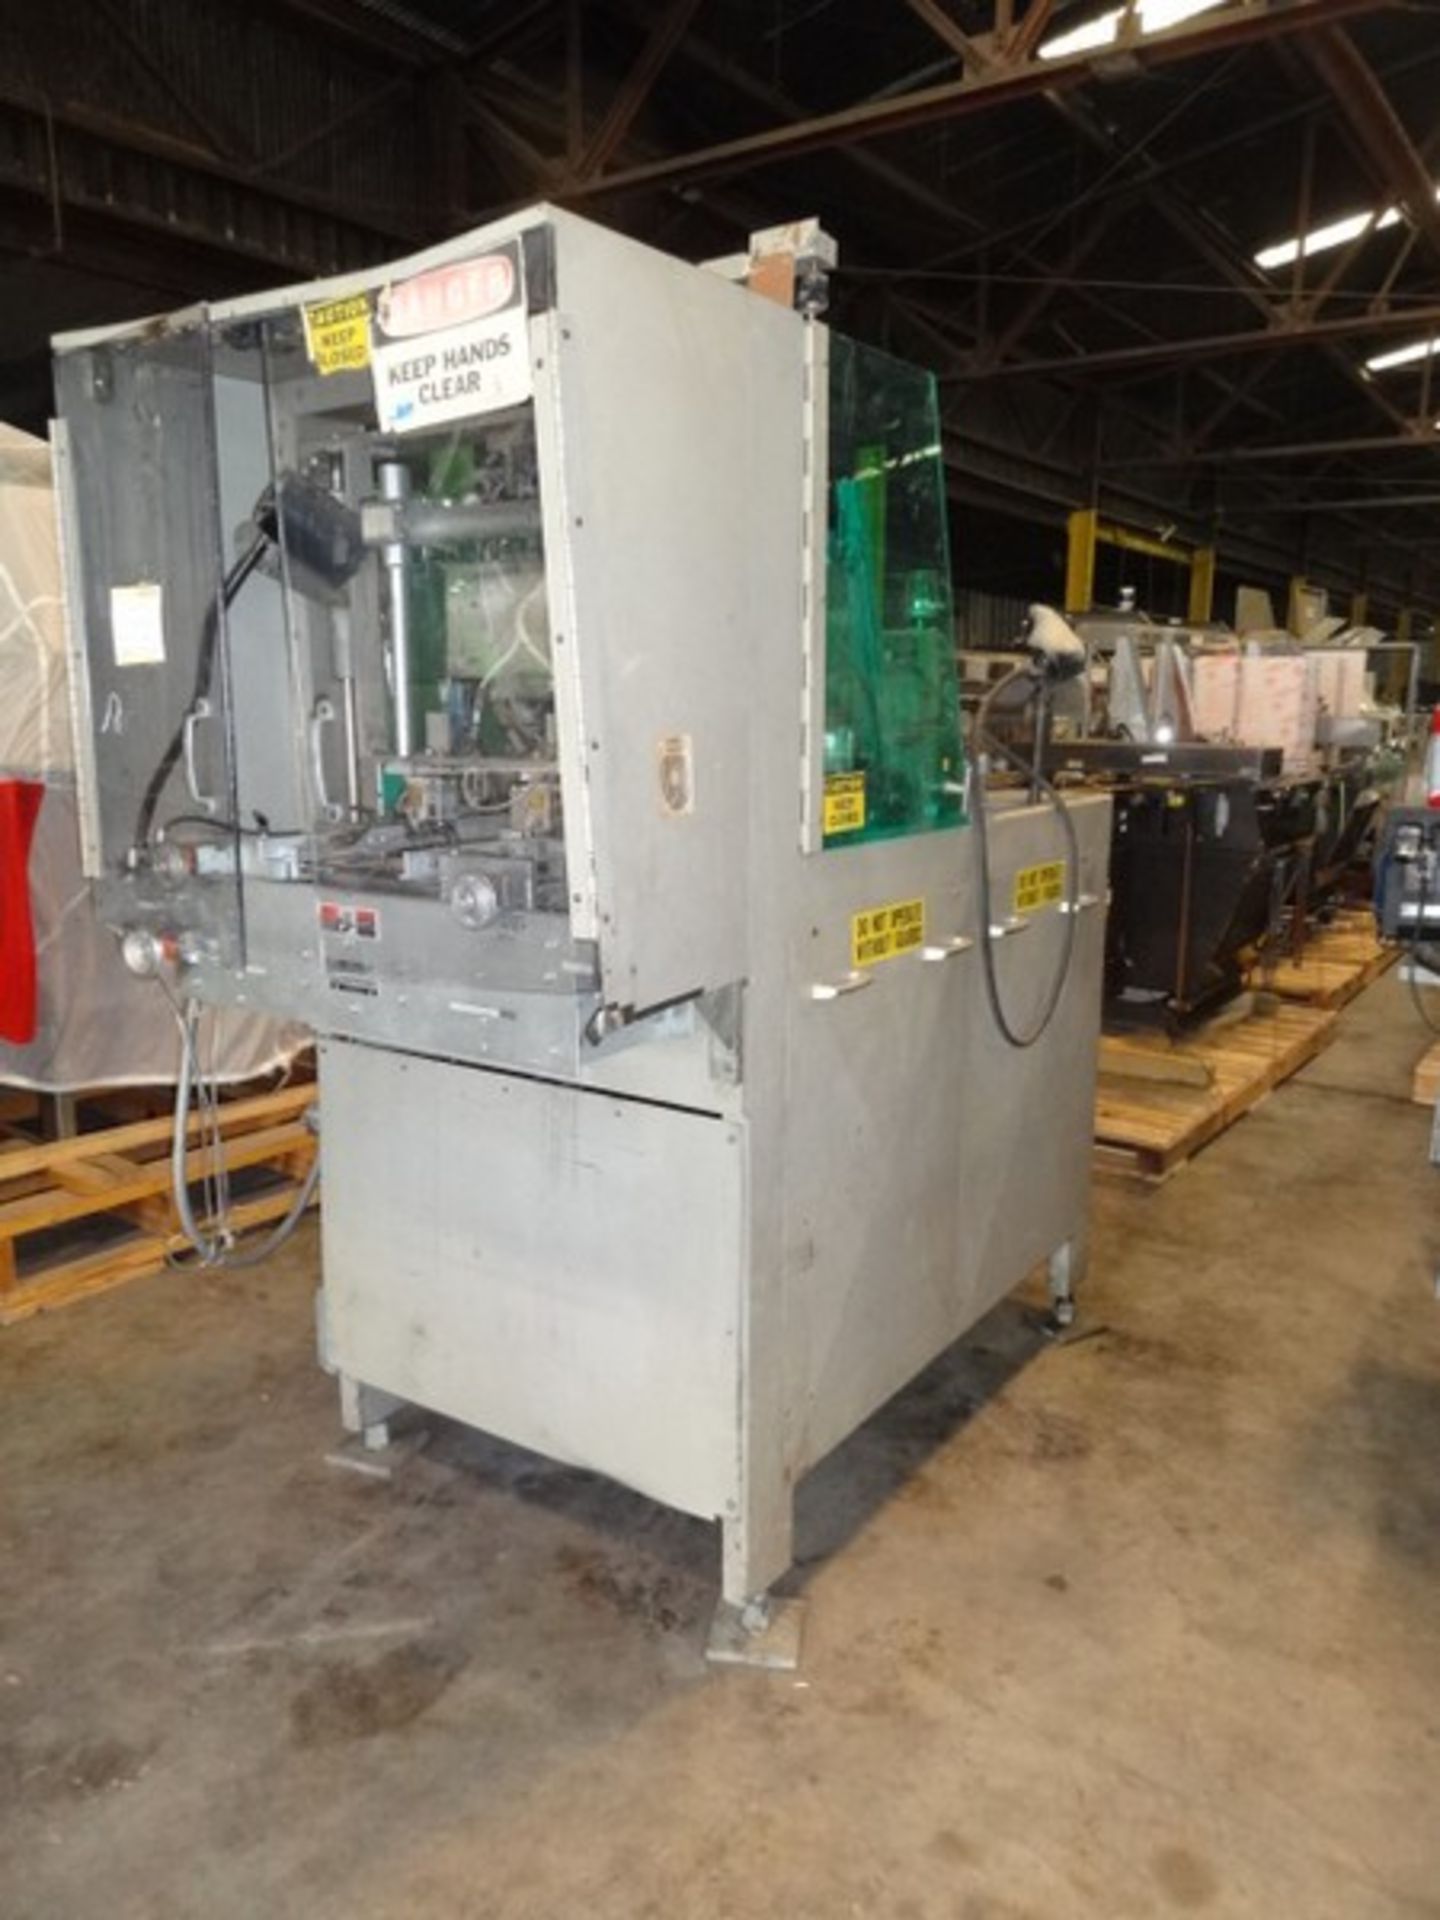 DELKOR 751 Tray Former with Nordson Hot Melt Glue (Located Charleston, SC) - Image 2 of 4